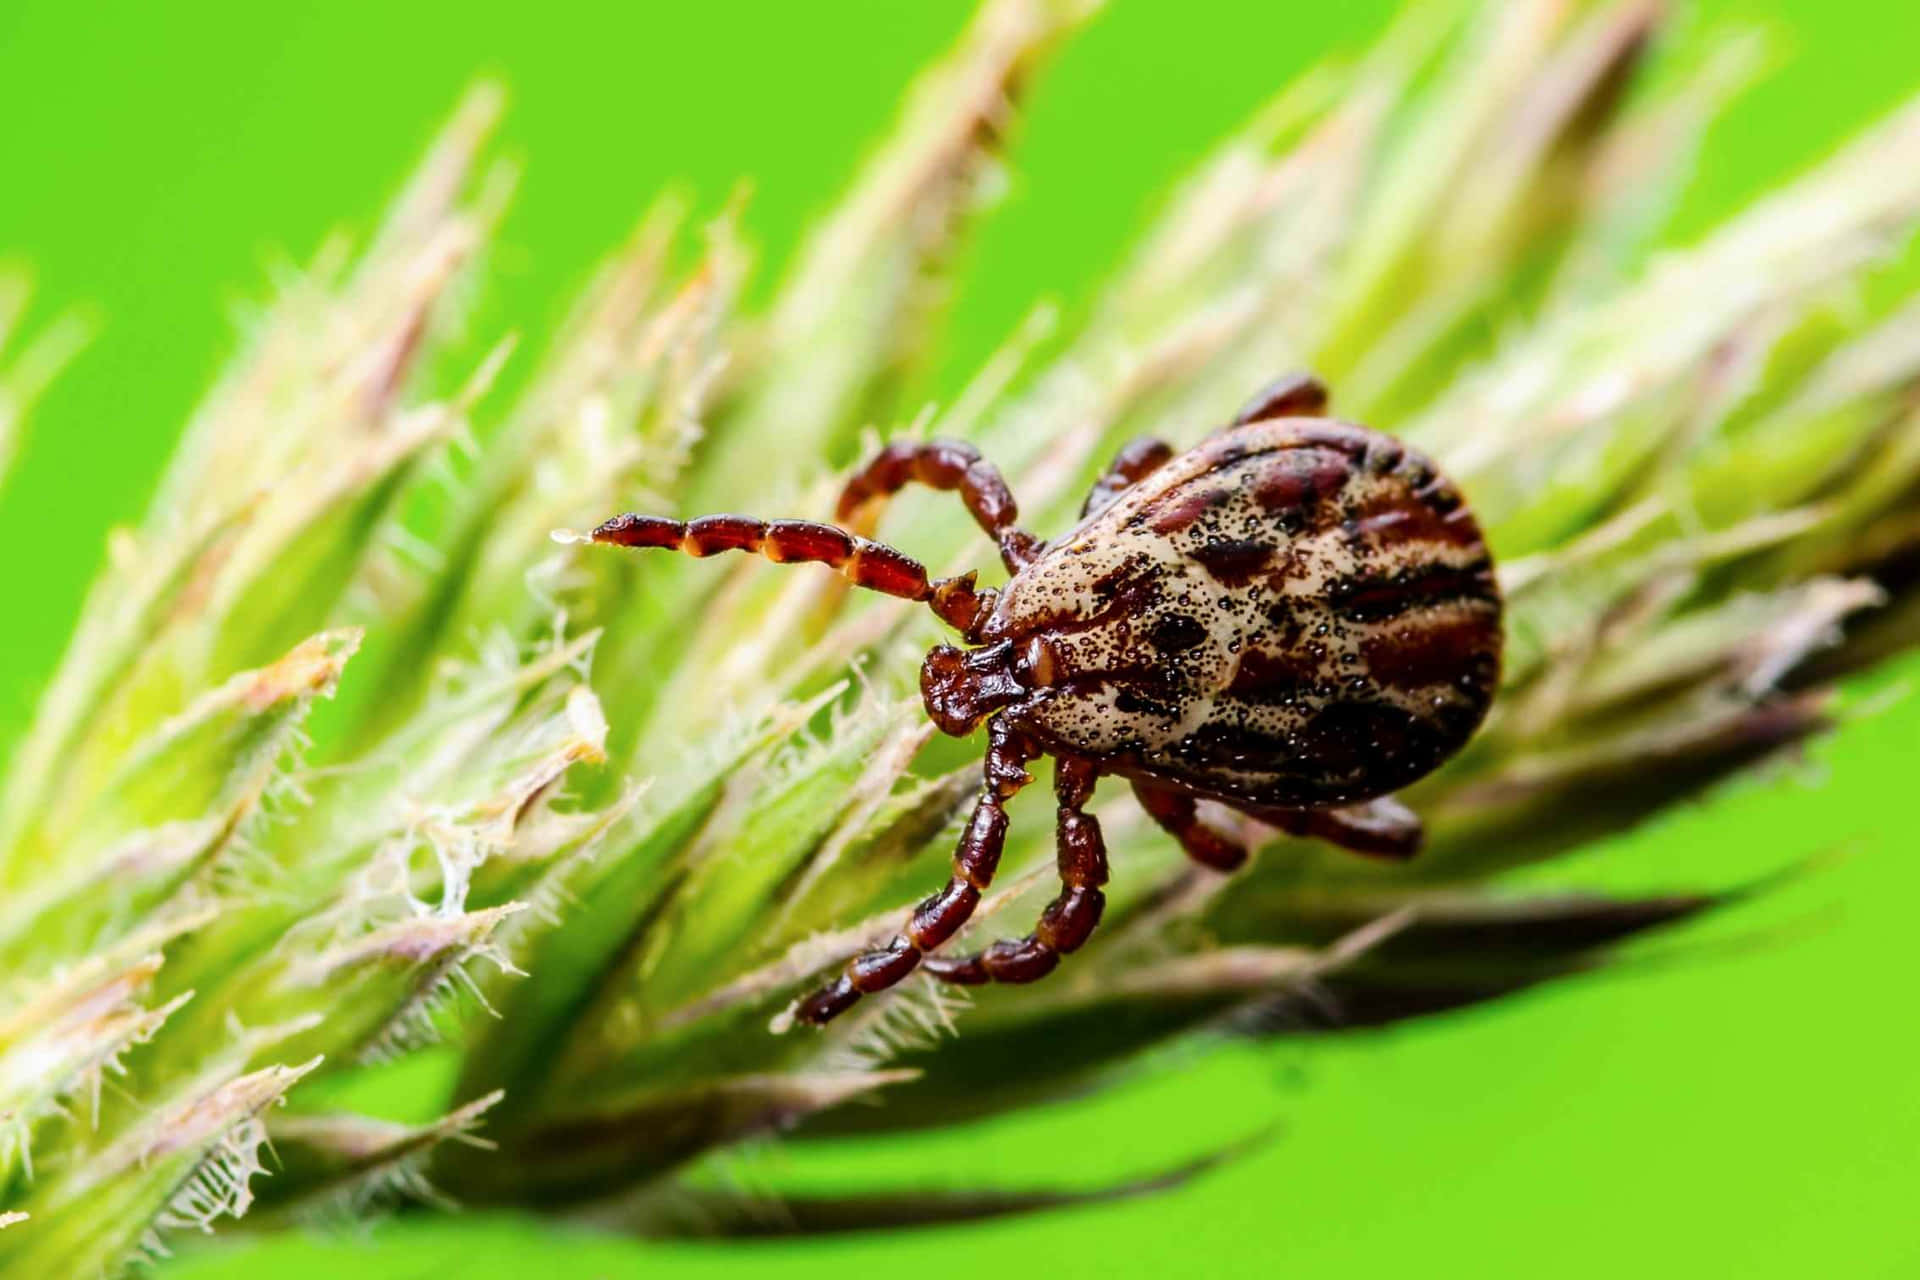 Vibrant Close-up Image of a Tick